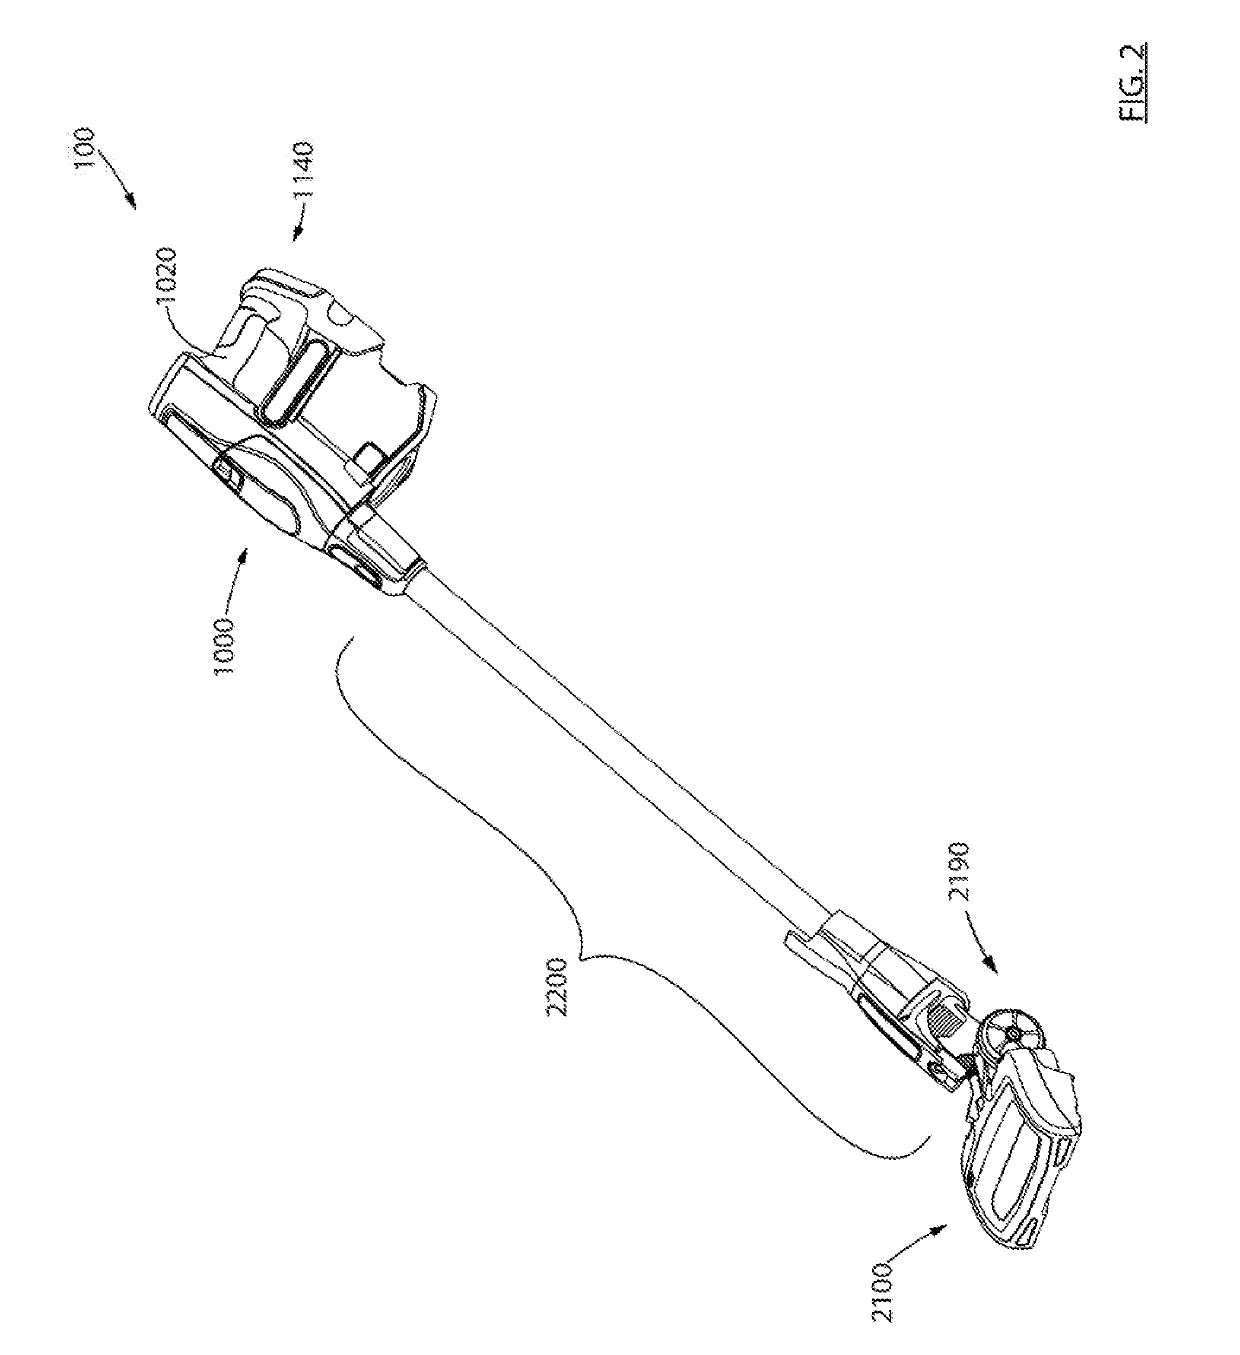 Surface cleaning apparatus with a variable inlet flow area